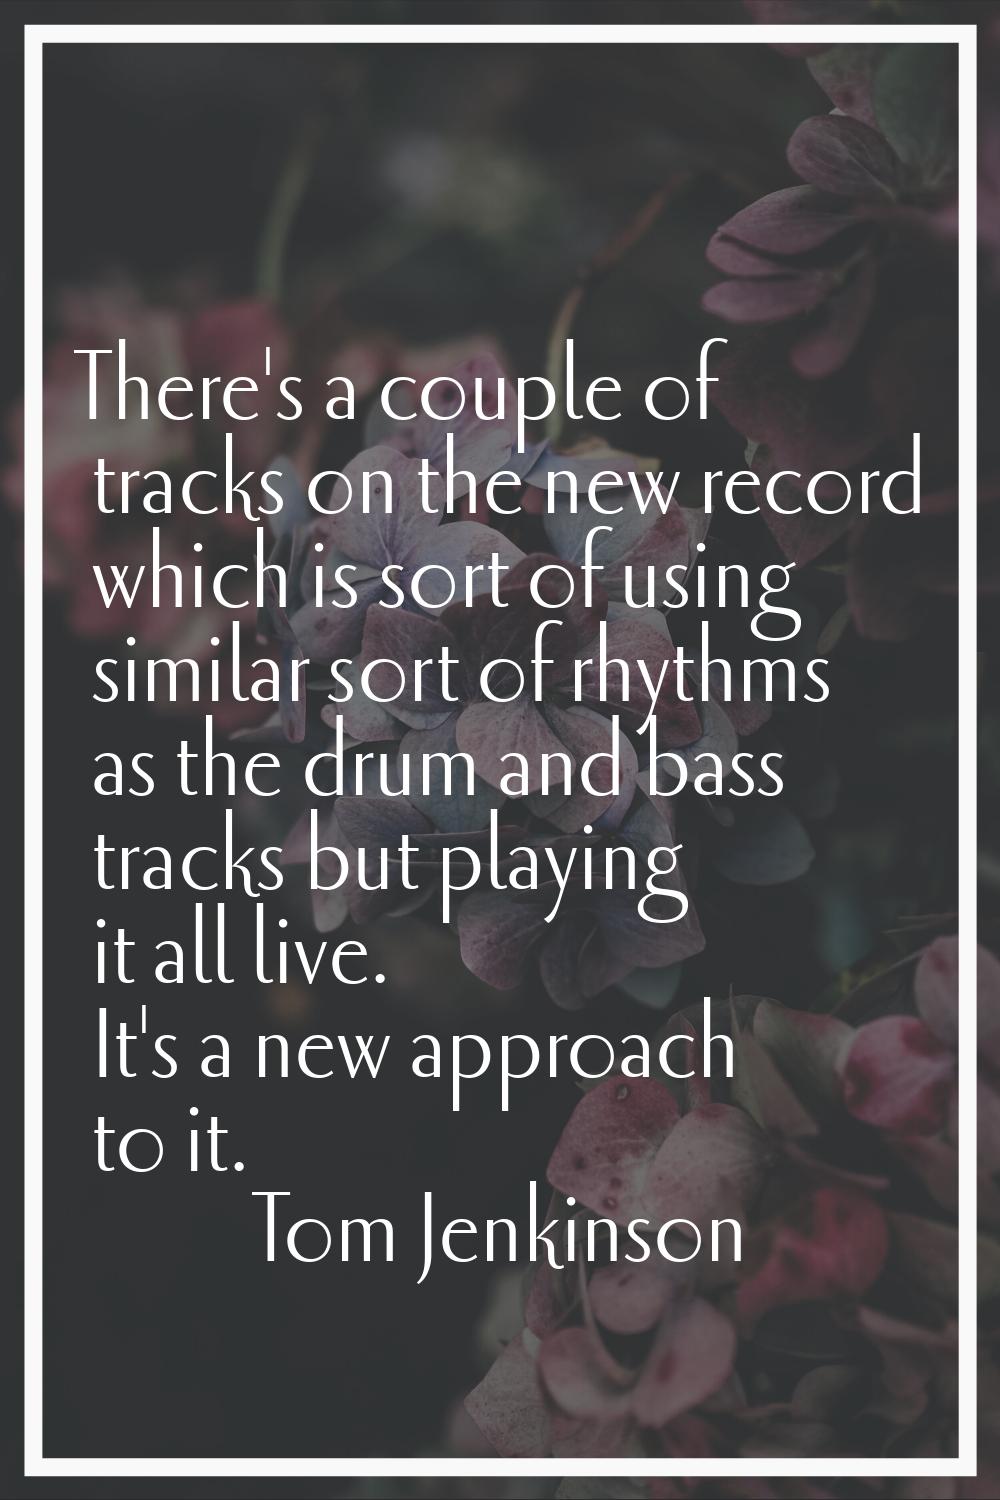 There's a couple of tracks on the new record which is sort of using similar sort of rhythms as the 